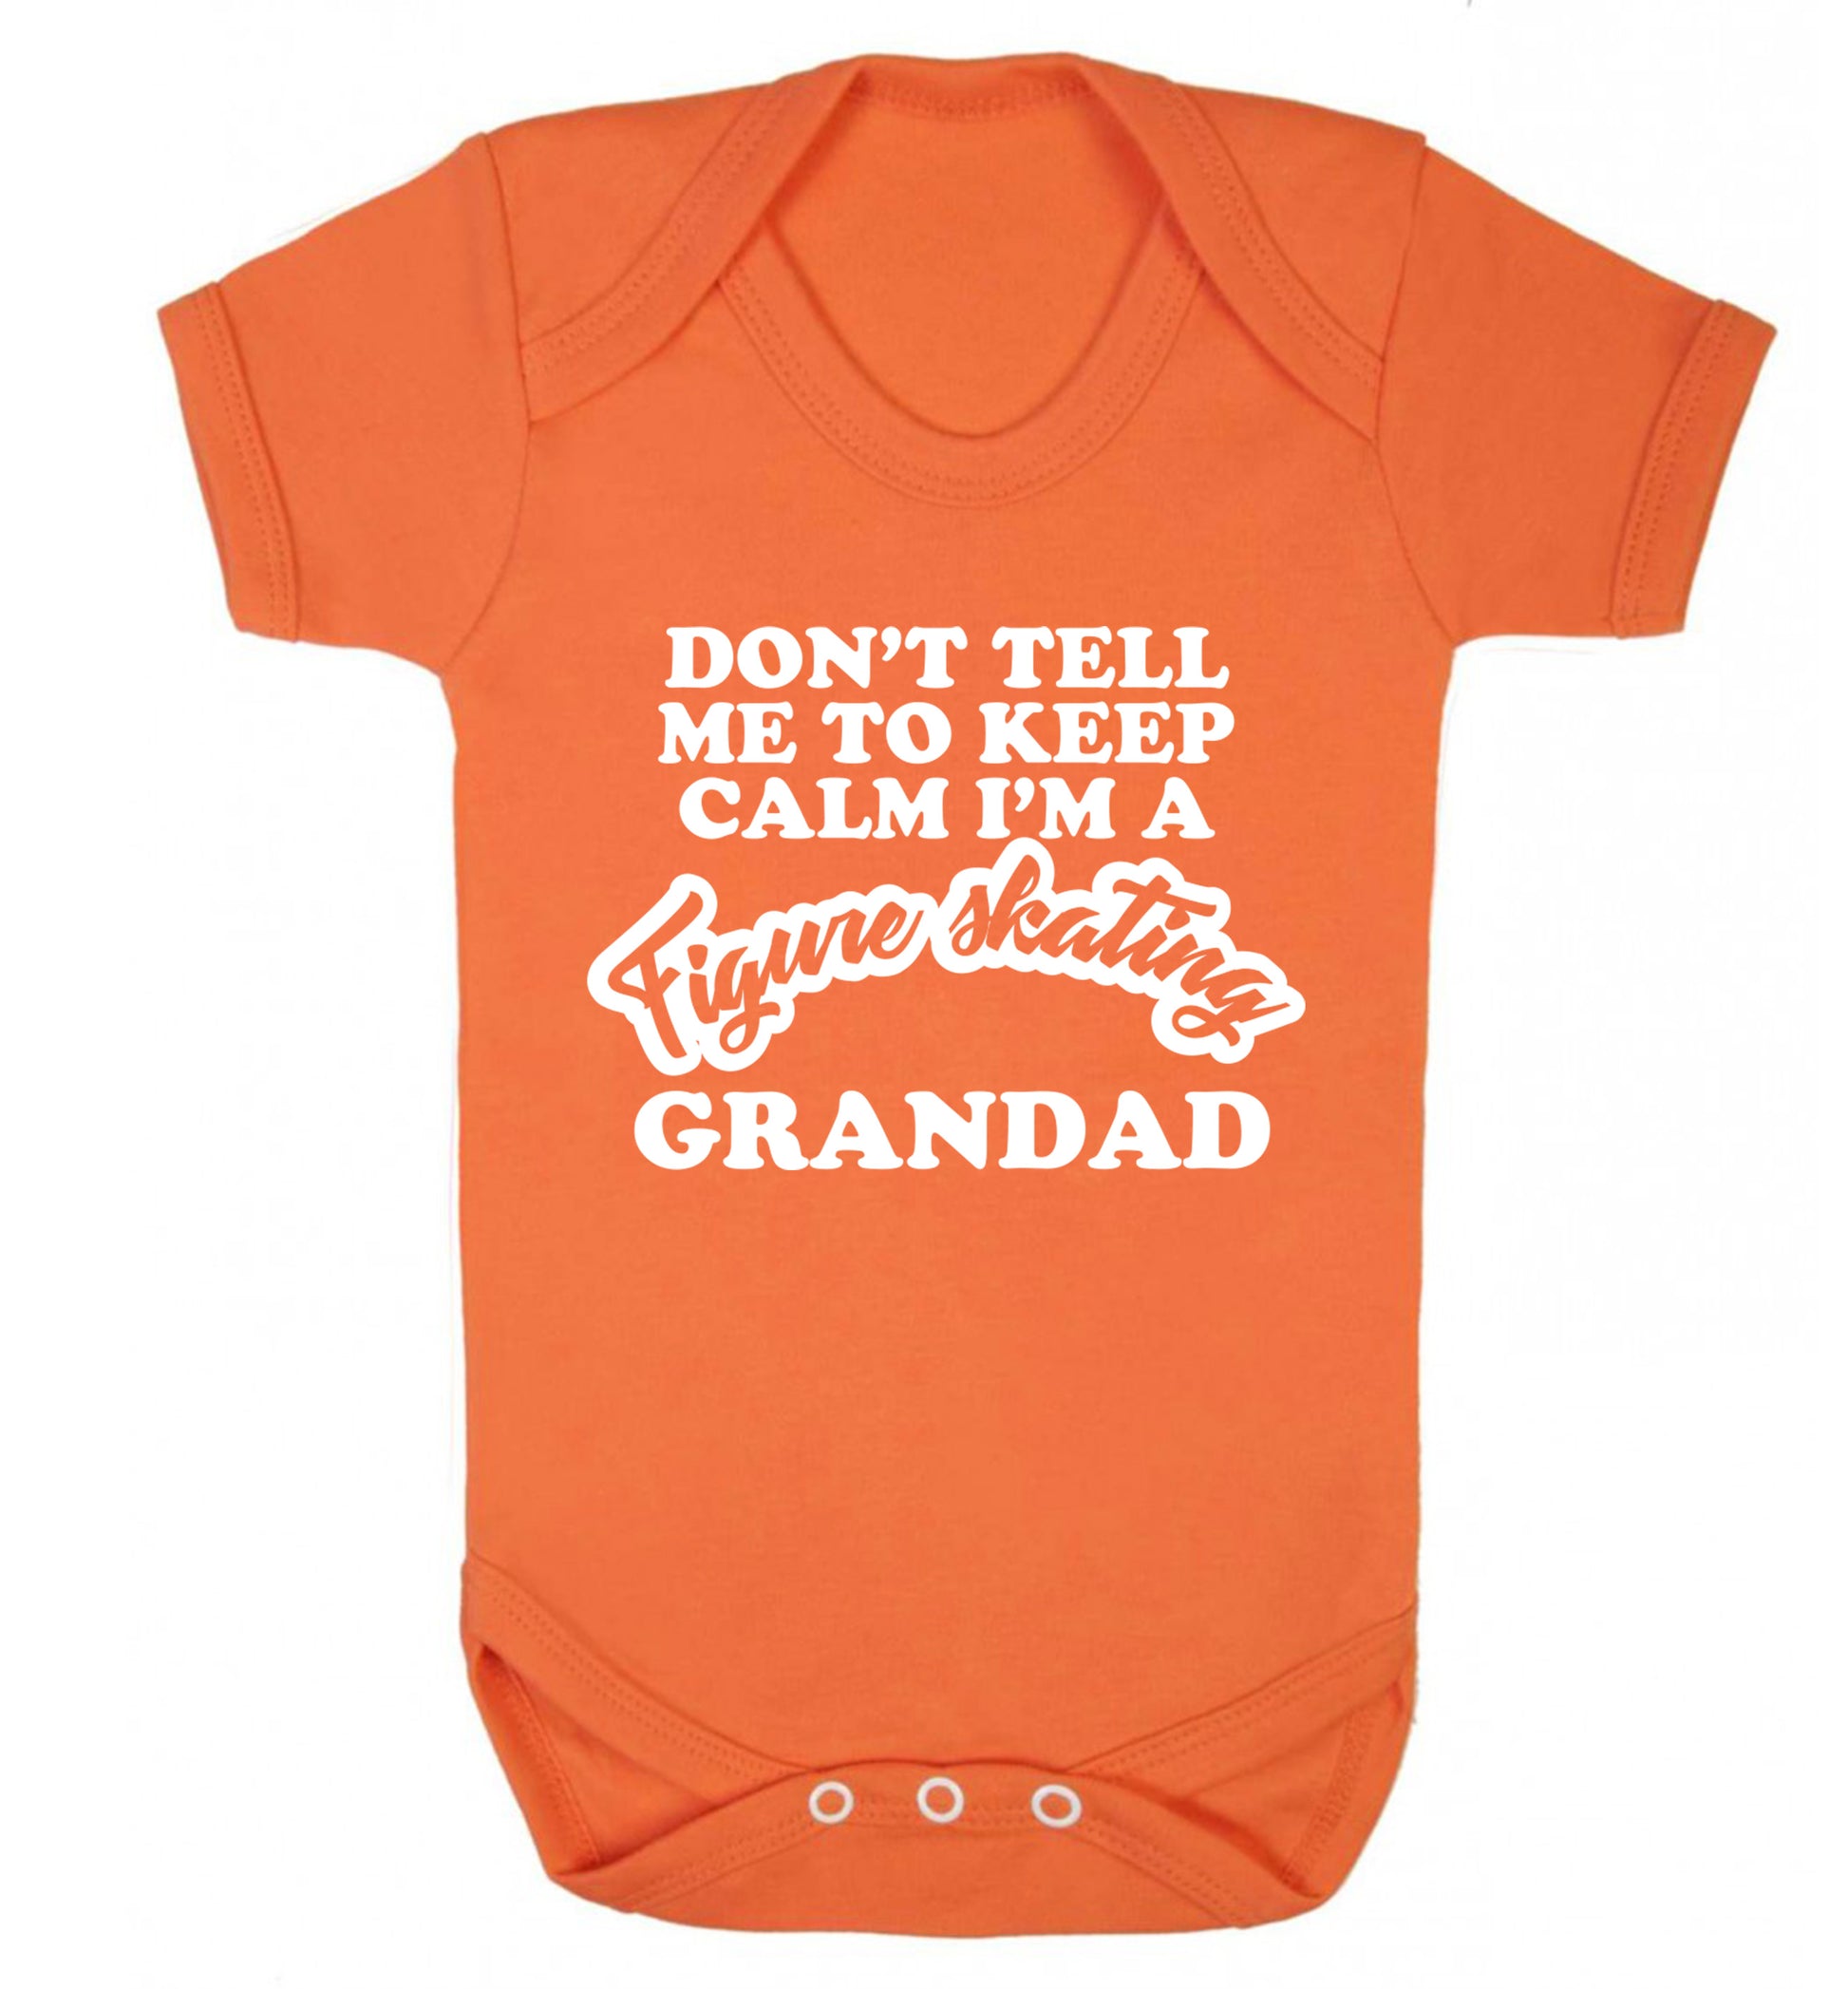 Don't tell me to keep calm I'm a figure skating grandad Baby Vest orange 18-24 months